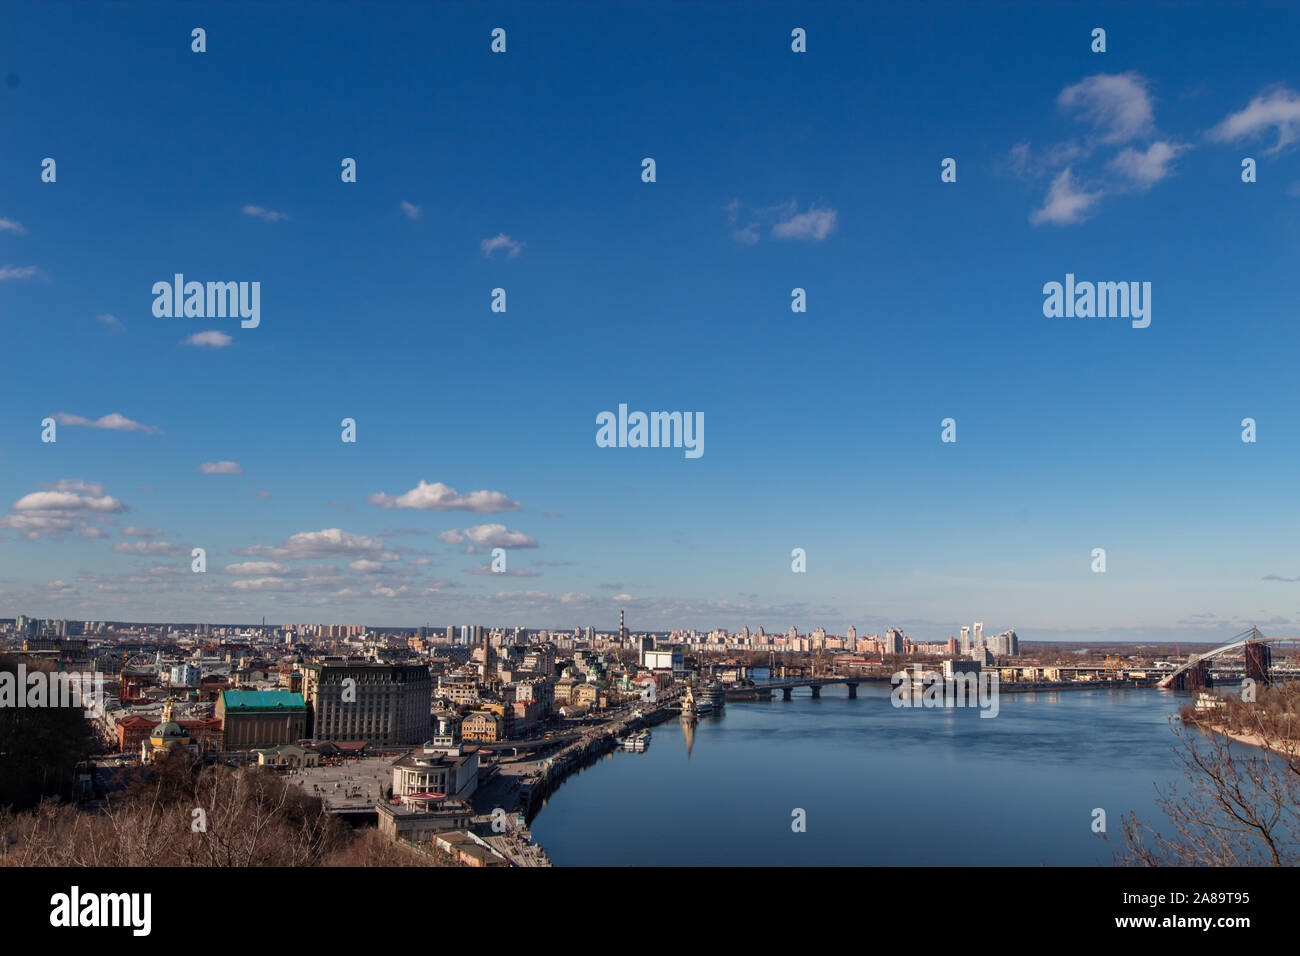 View of the metropolis from a height. City of Kiev, Ukraine. The Dnieper River flowing through the center of Kiev. Stock Photo